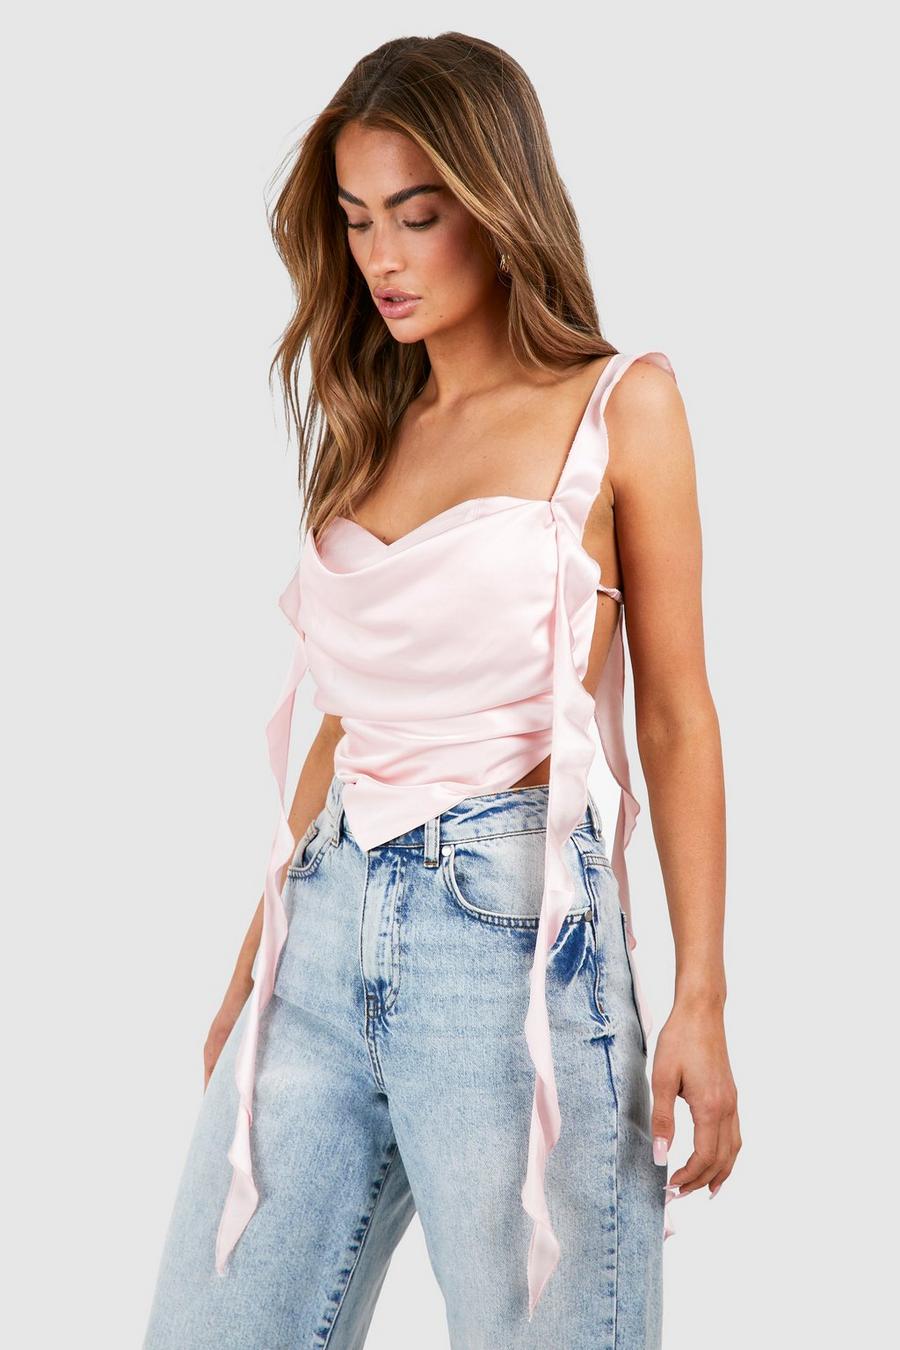 ASOS Corset & Bustier Tops for Women sale - discounted price